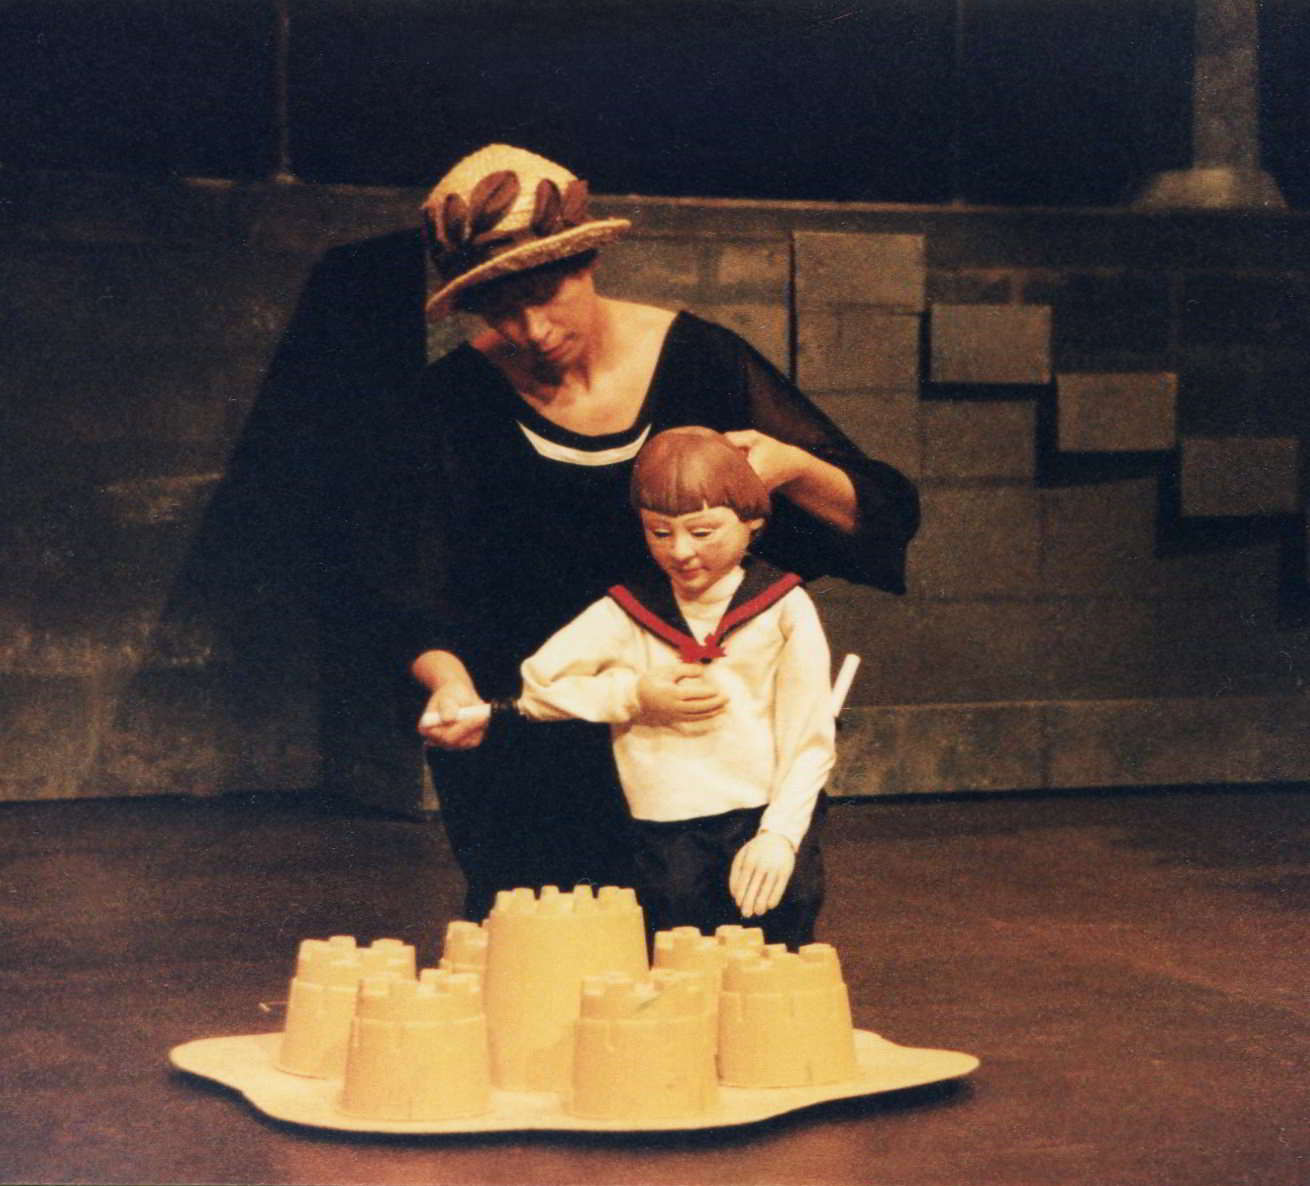 Ask for the Captain Handspan Theatre Actor as nanny helps puppet boy build sand castles